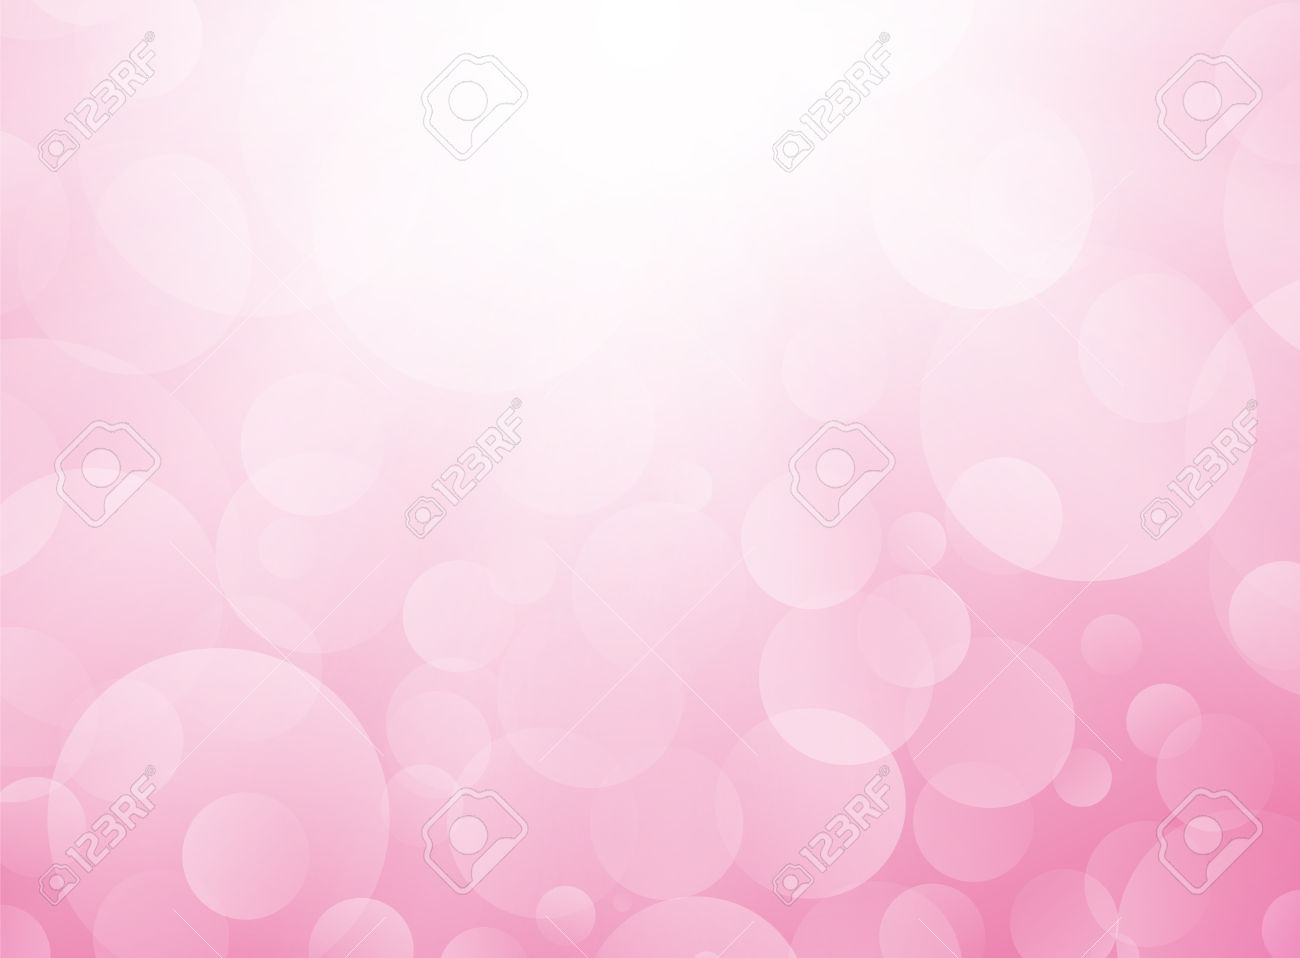 Pink Background Images High Quality Backgrounds of Pink